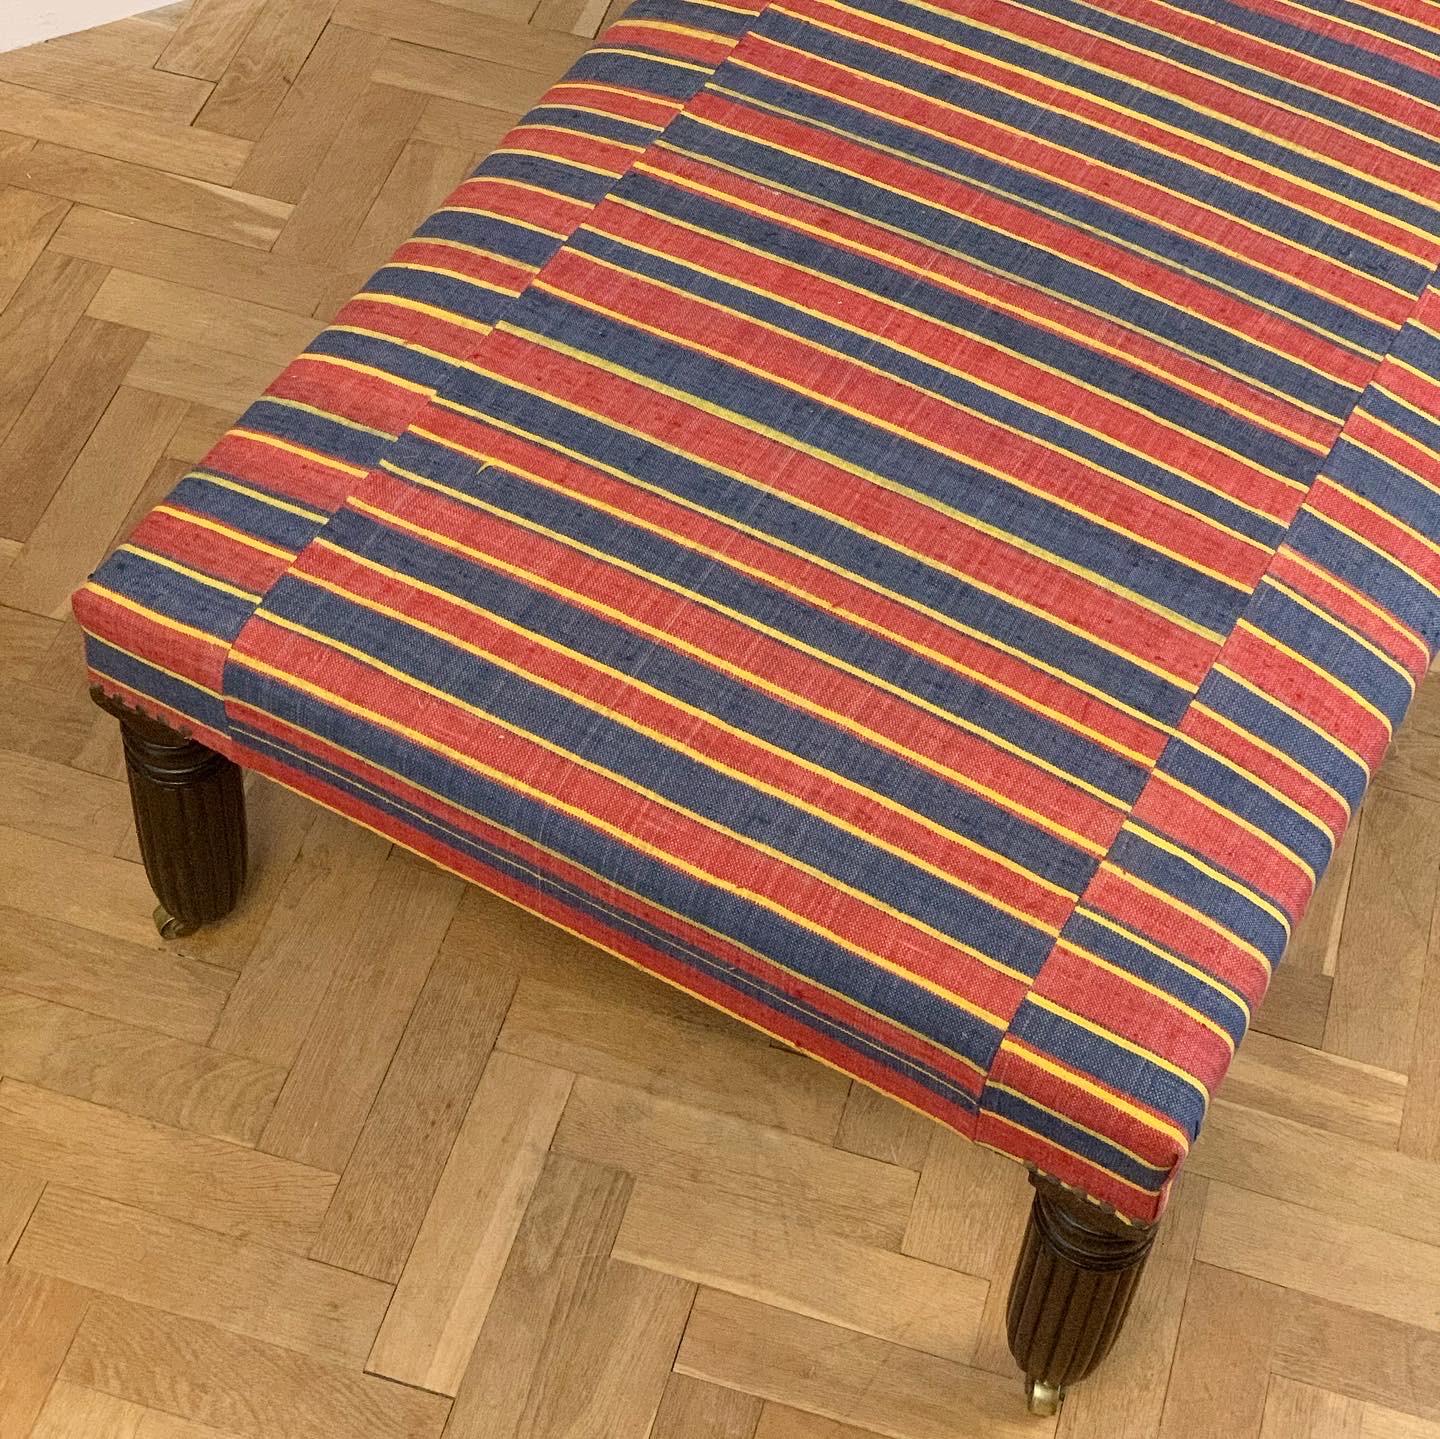 An upholstered stool with mid nineteenth century mahogany reeded and tapered legs covered in a vibrant tri-coloured striped Turkish Kilim.